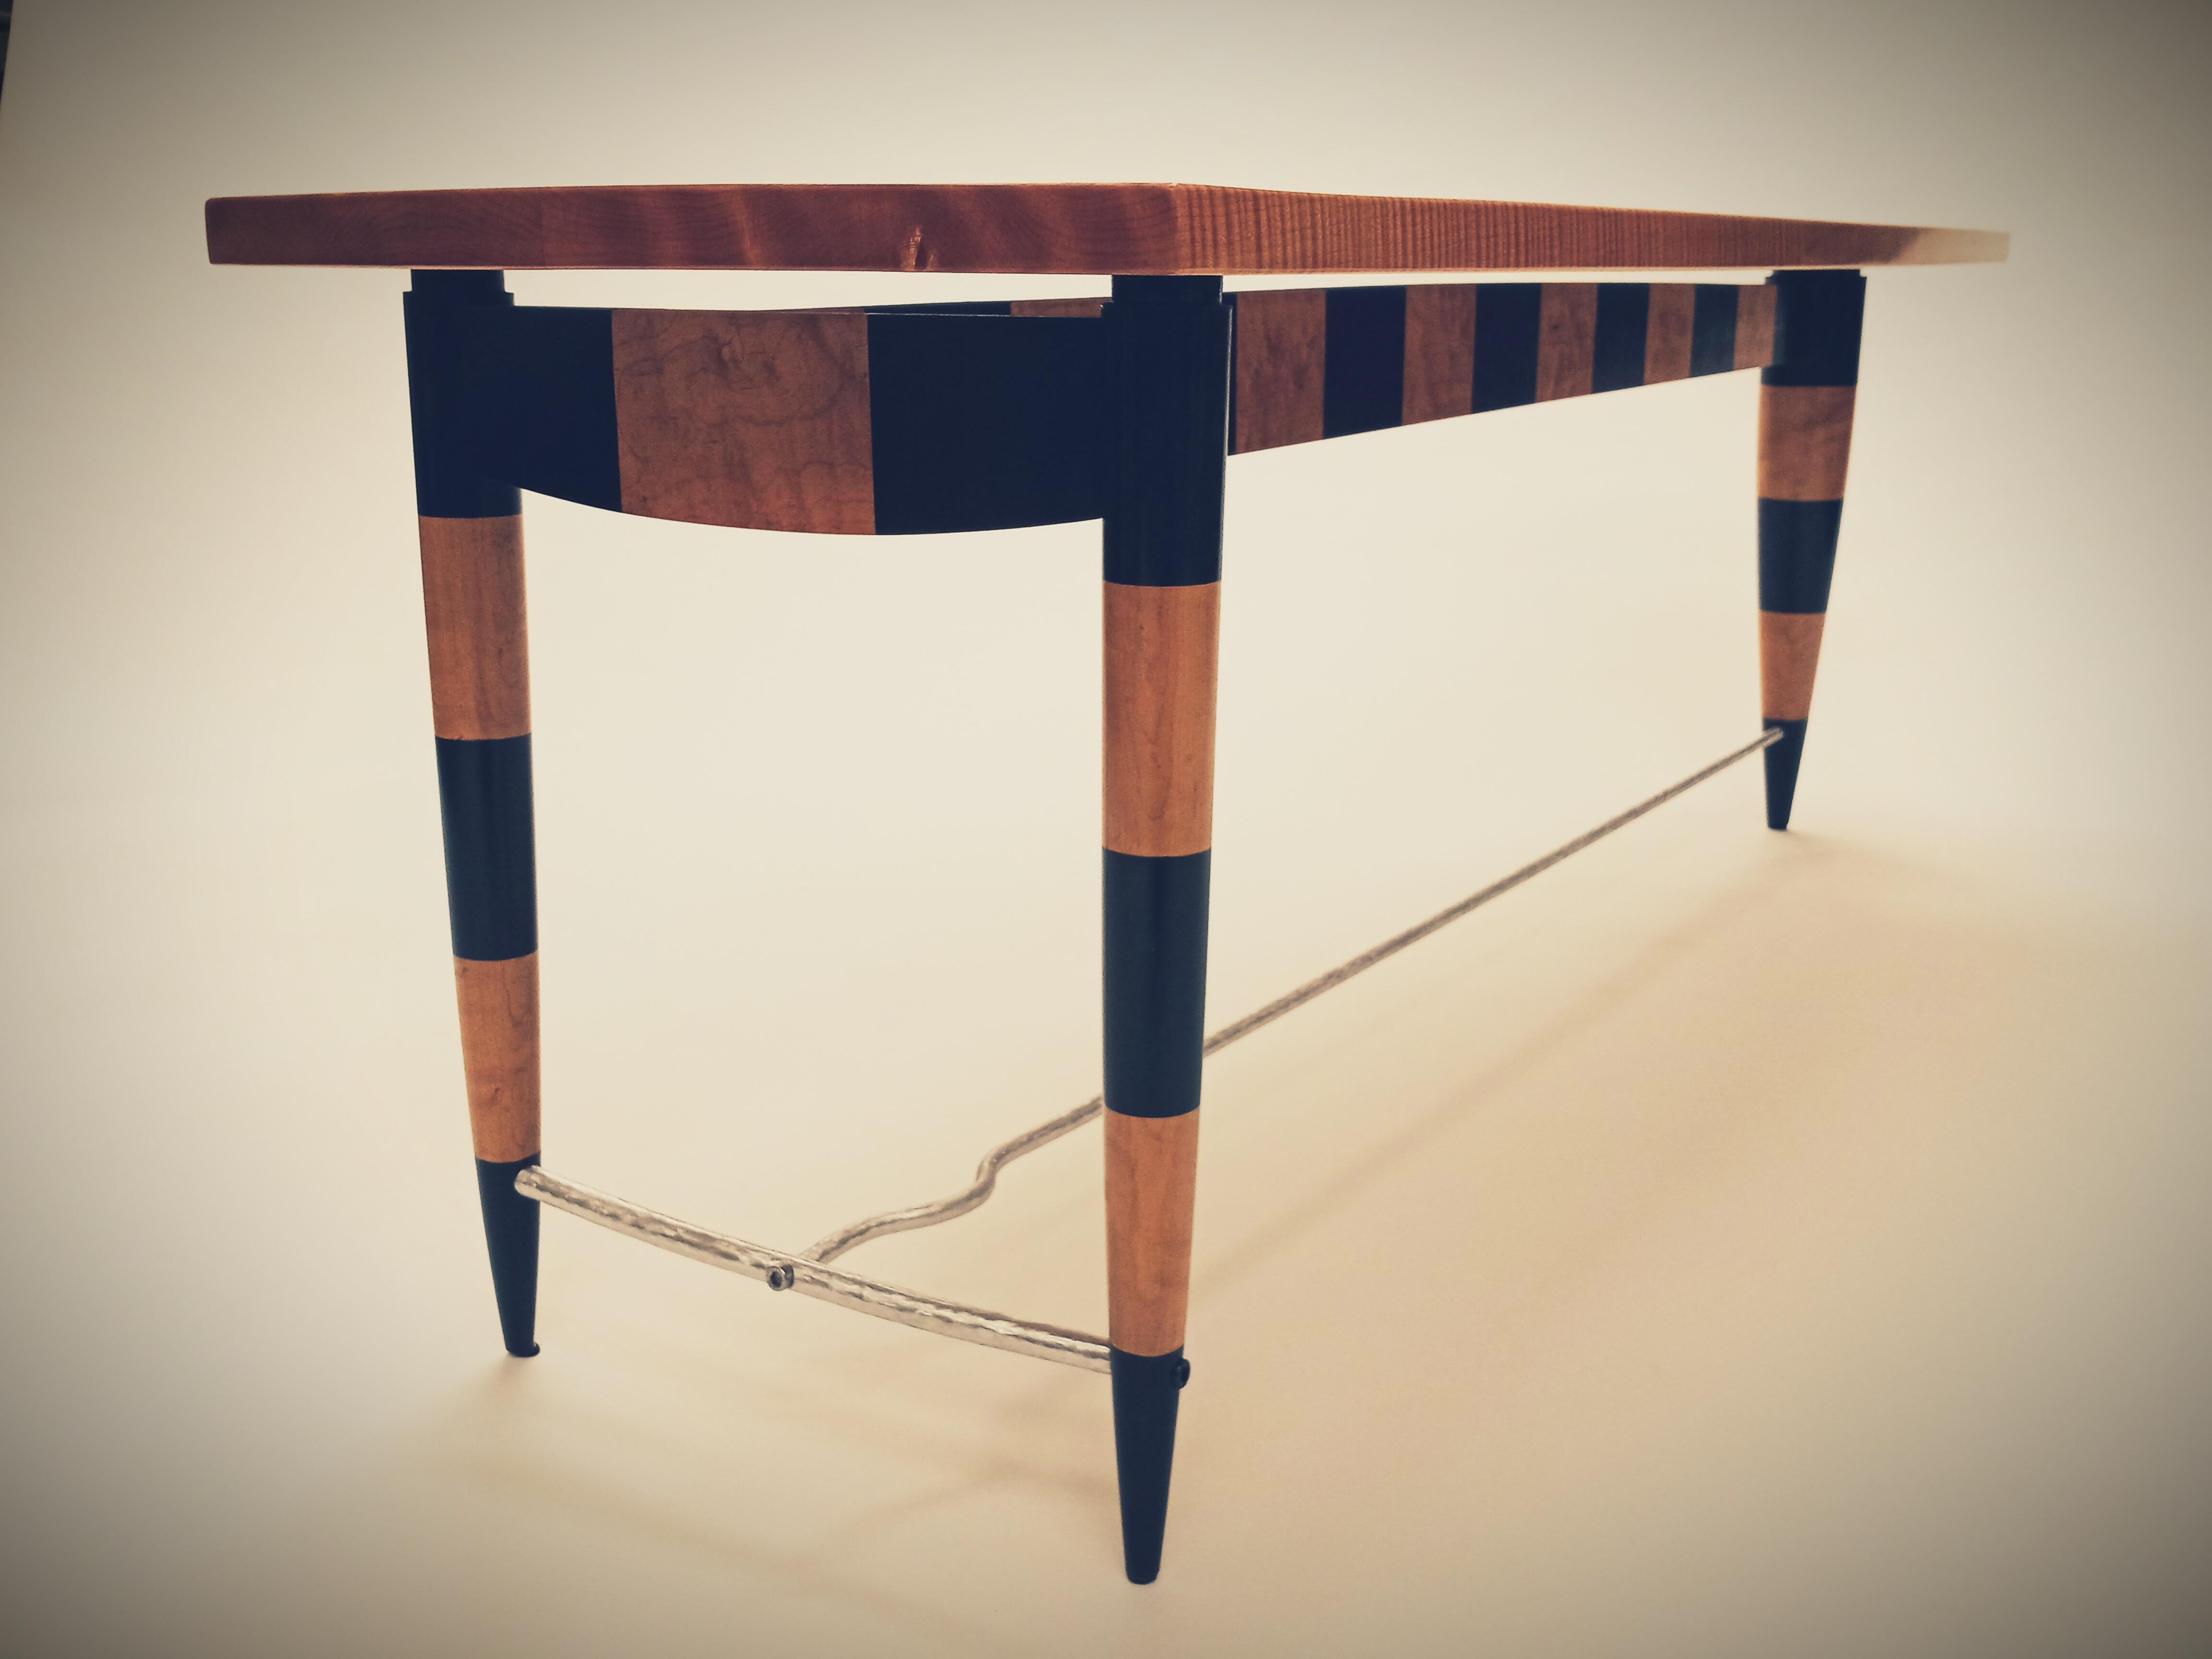 Striped Series Coffee Table is part of a larger series of work entitled 